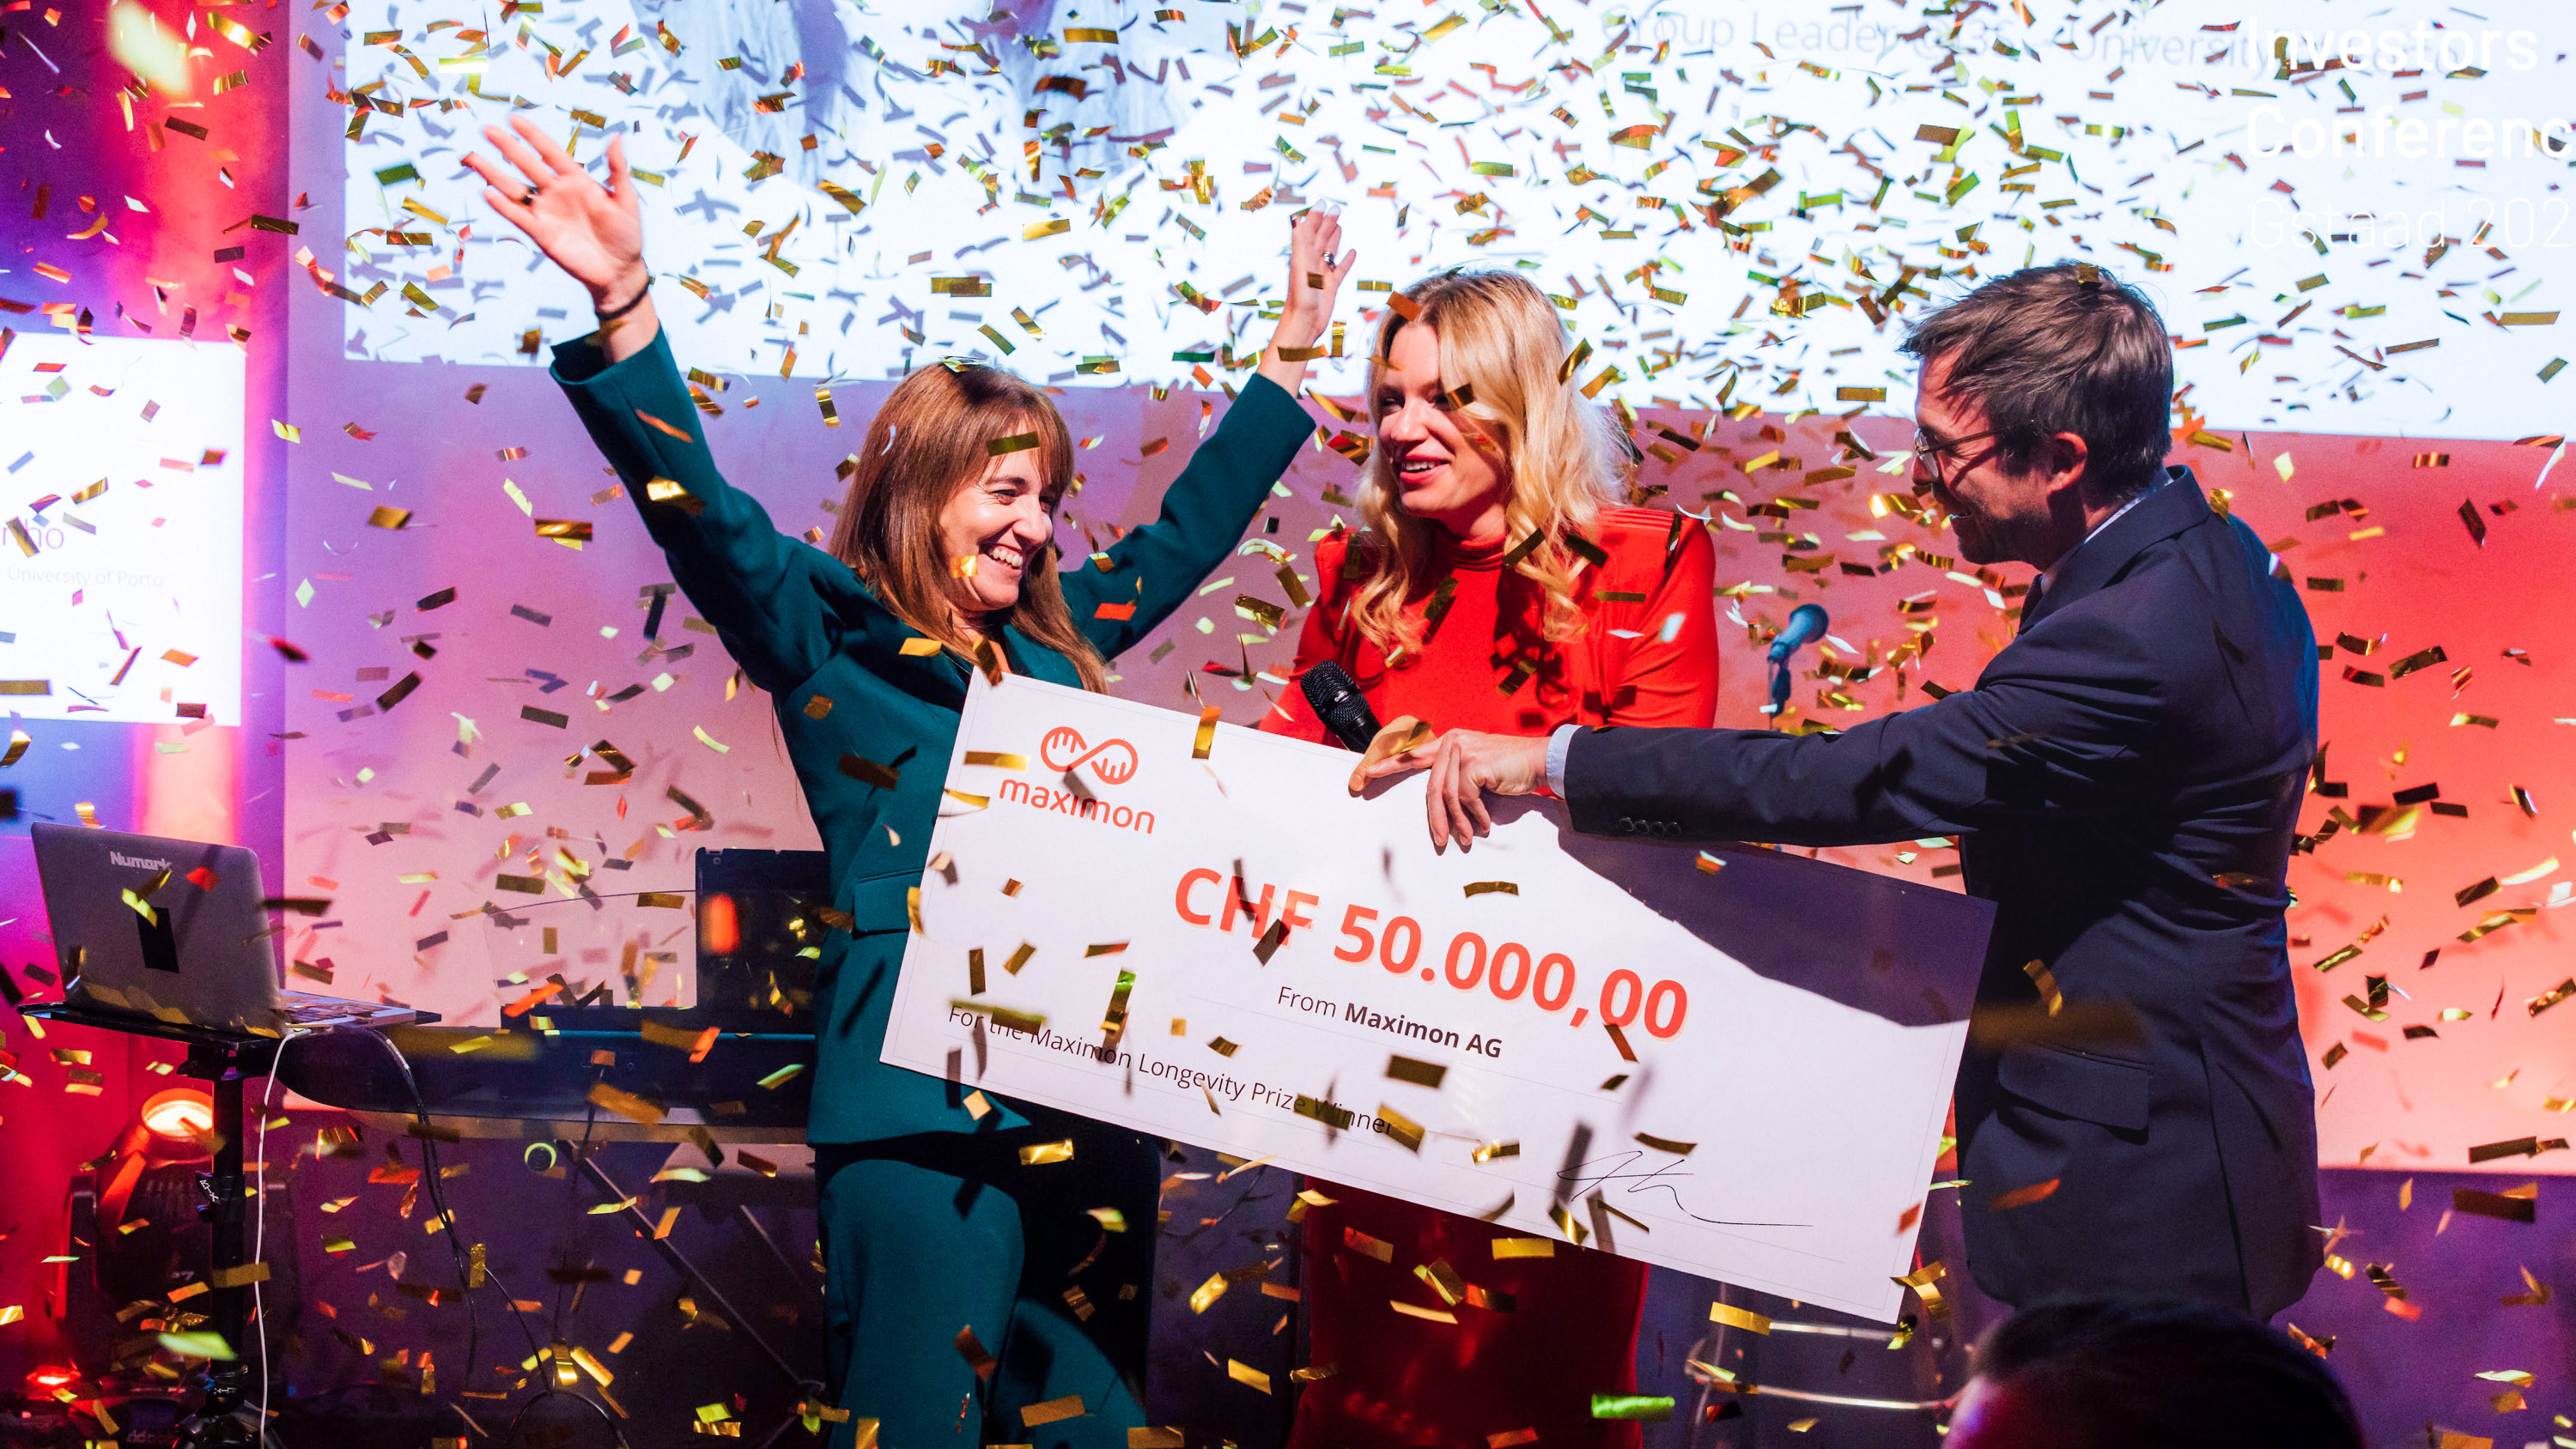 Longevity Prize winner celebrates with raised arms as confetti falls and she receives an oversized check